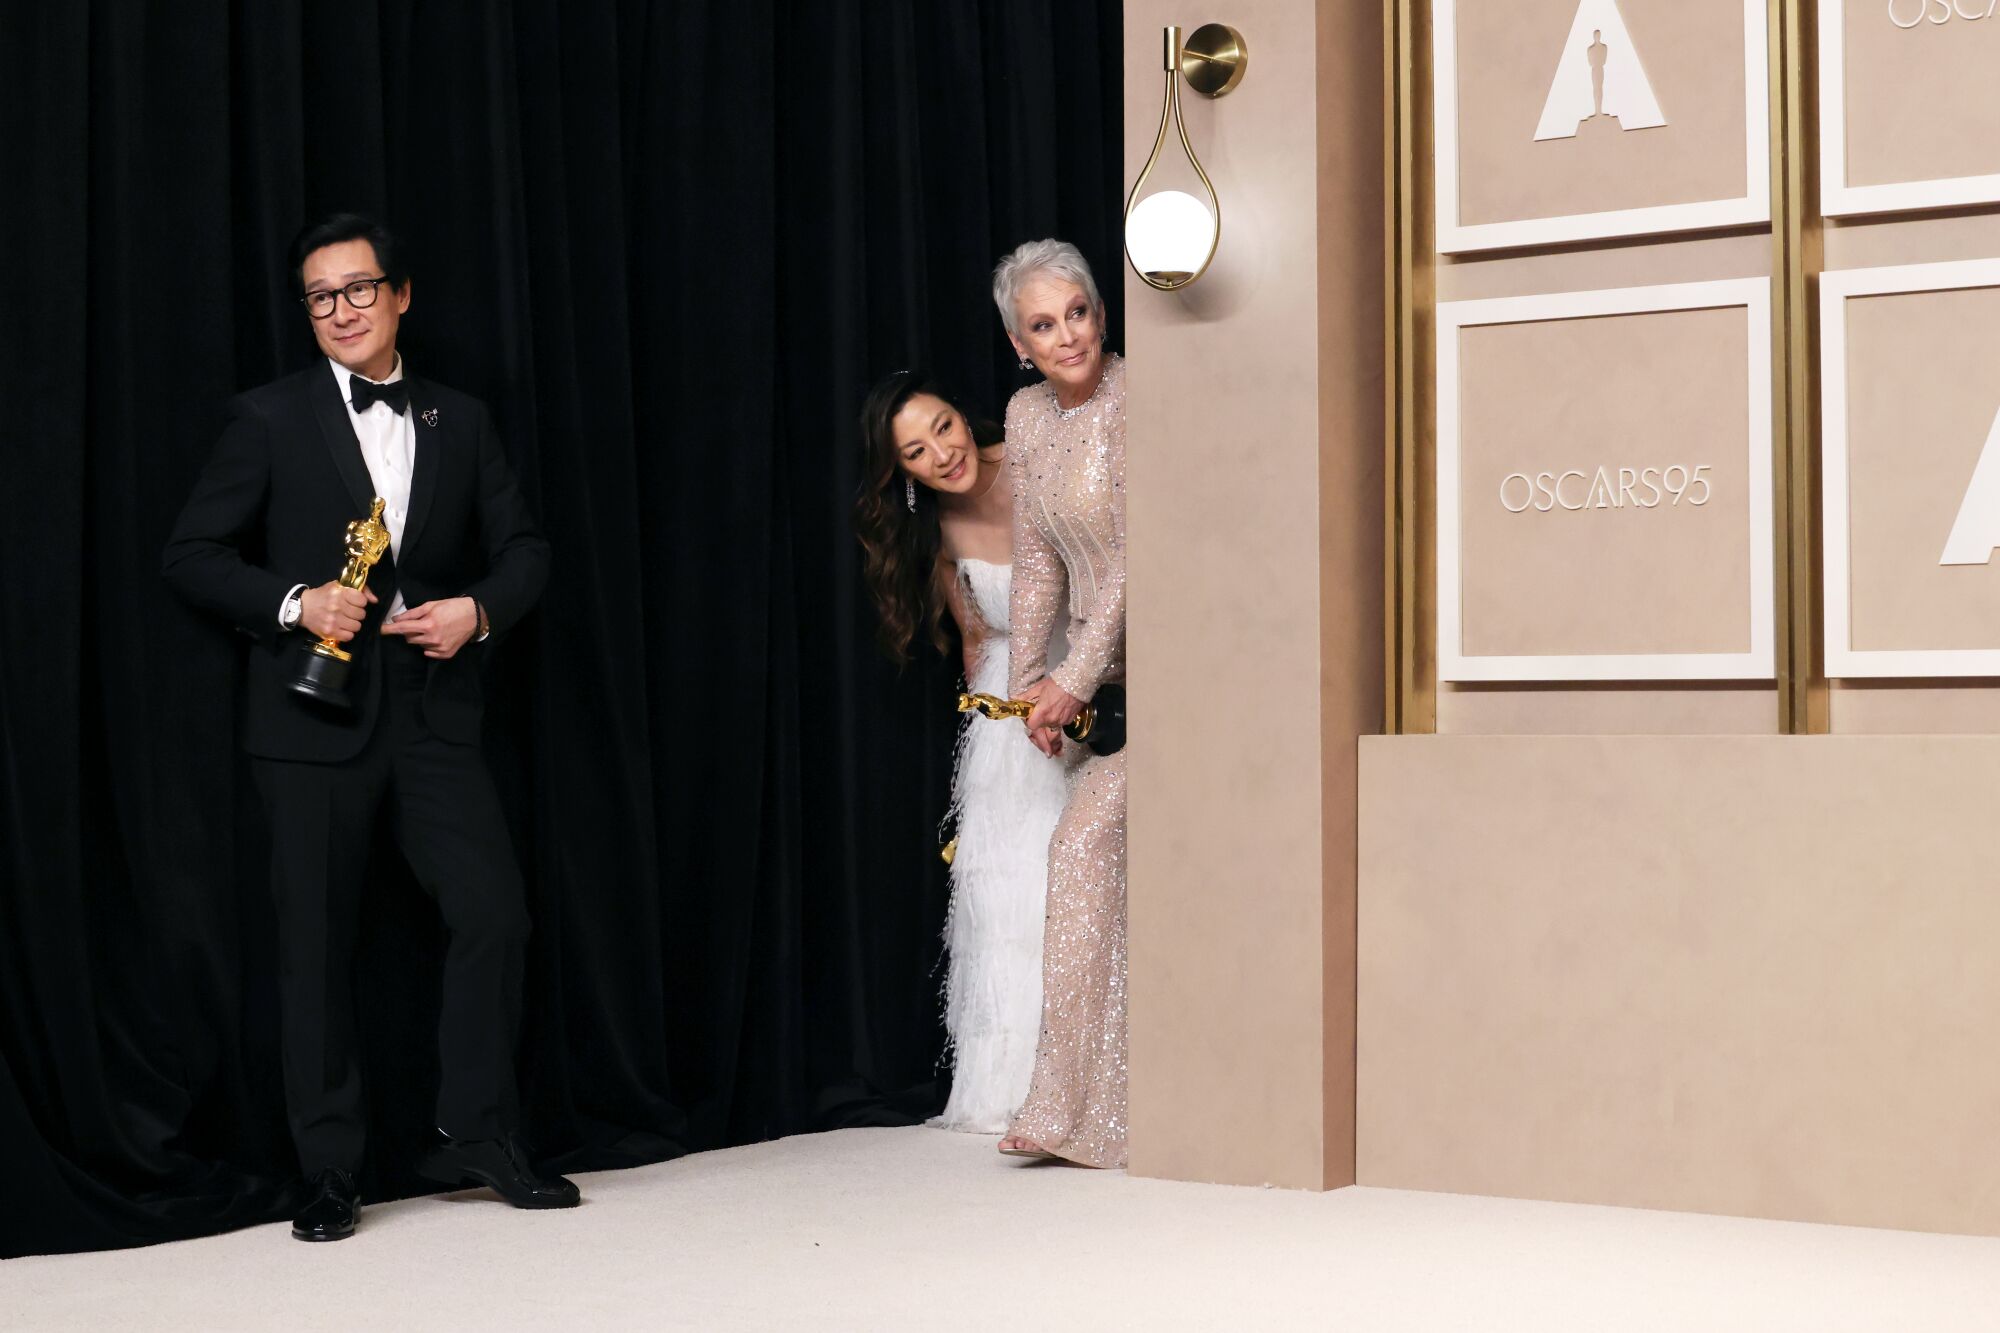 Three people in evening wear - a man stands at left while two women peek in from behind a wall with the writing "Oscars." 